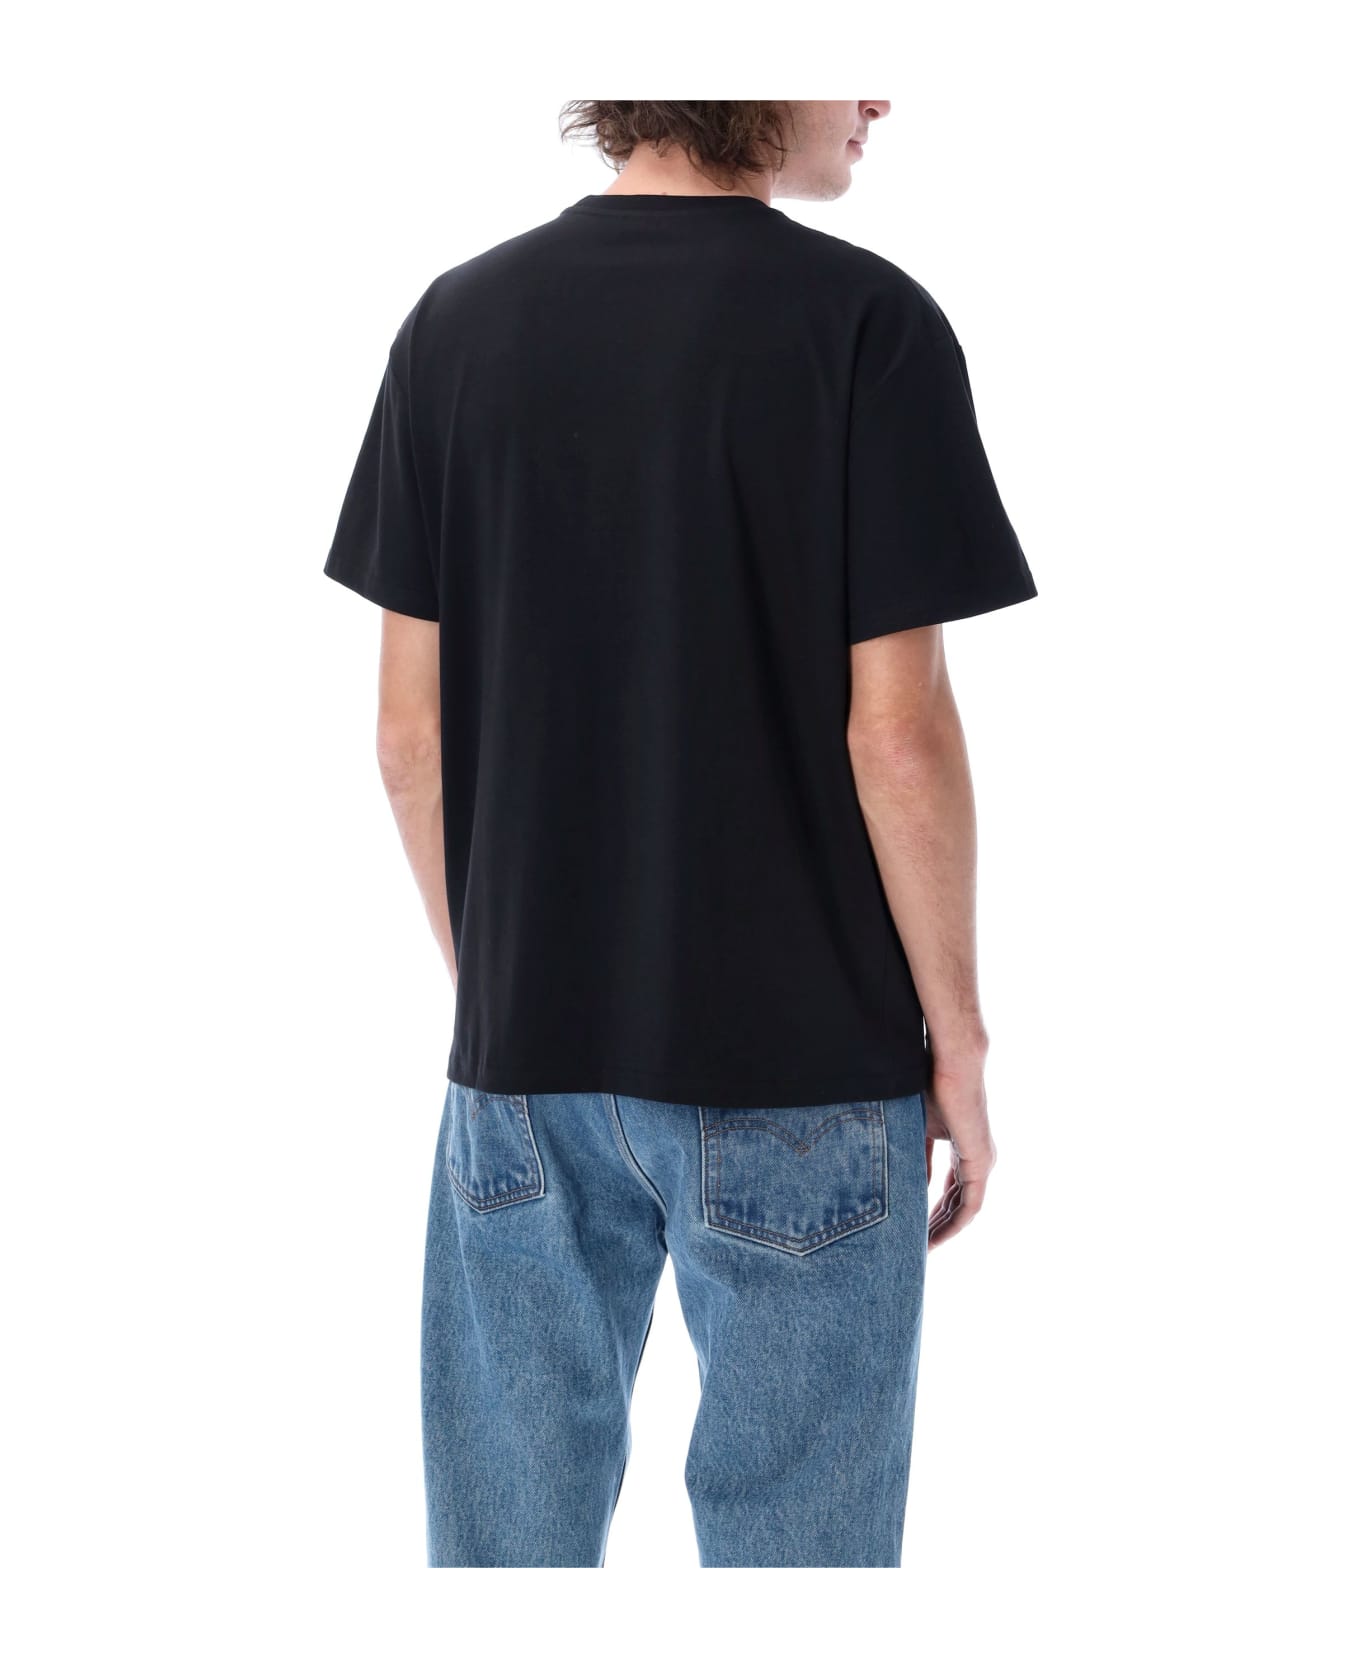 J.W. Anderson Anchor Patch T-shirt - BLACK